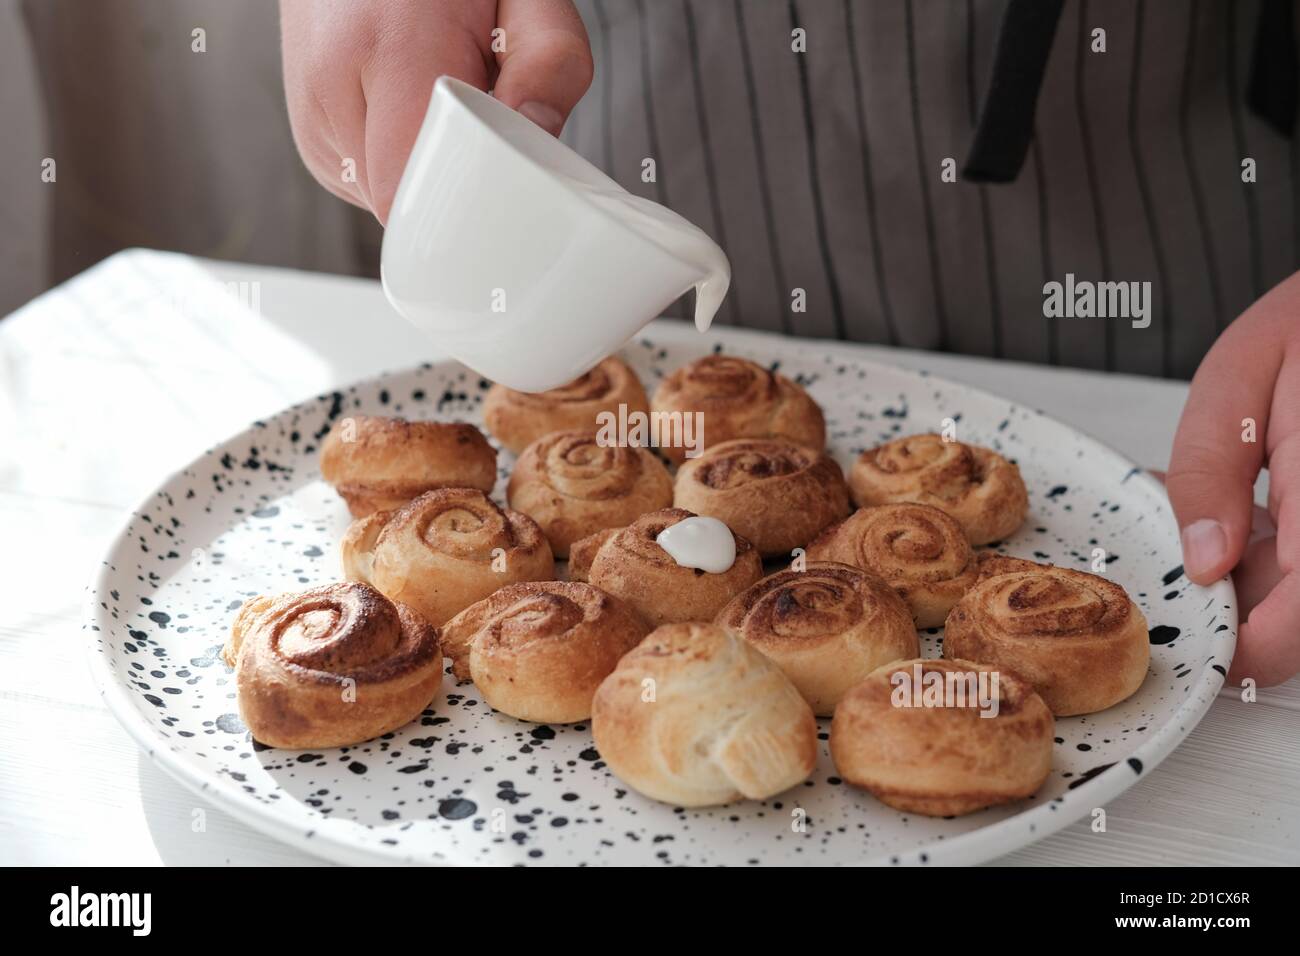 human hand pouring frosting on cinnamon swirls. selective focus. homemade cinnamon rolls with cream glaze. home cooking concept. close up view Stock Photo